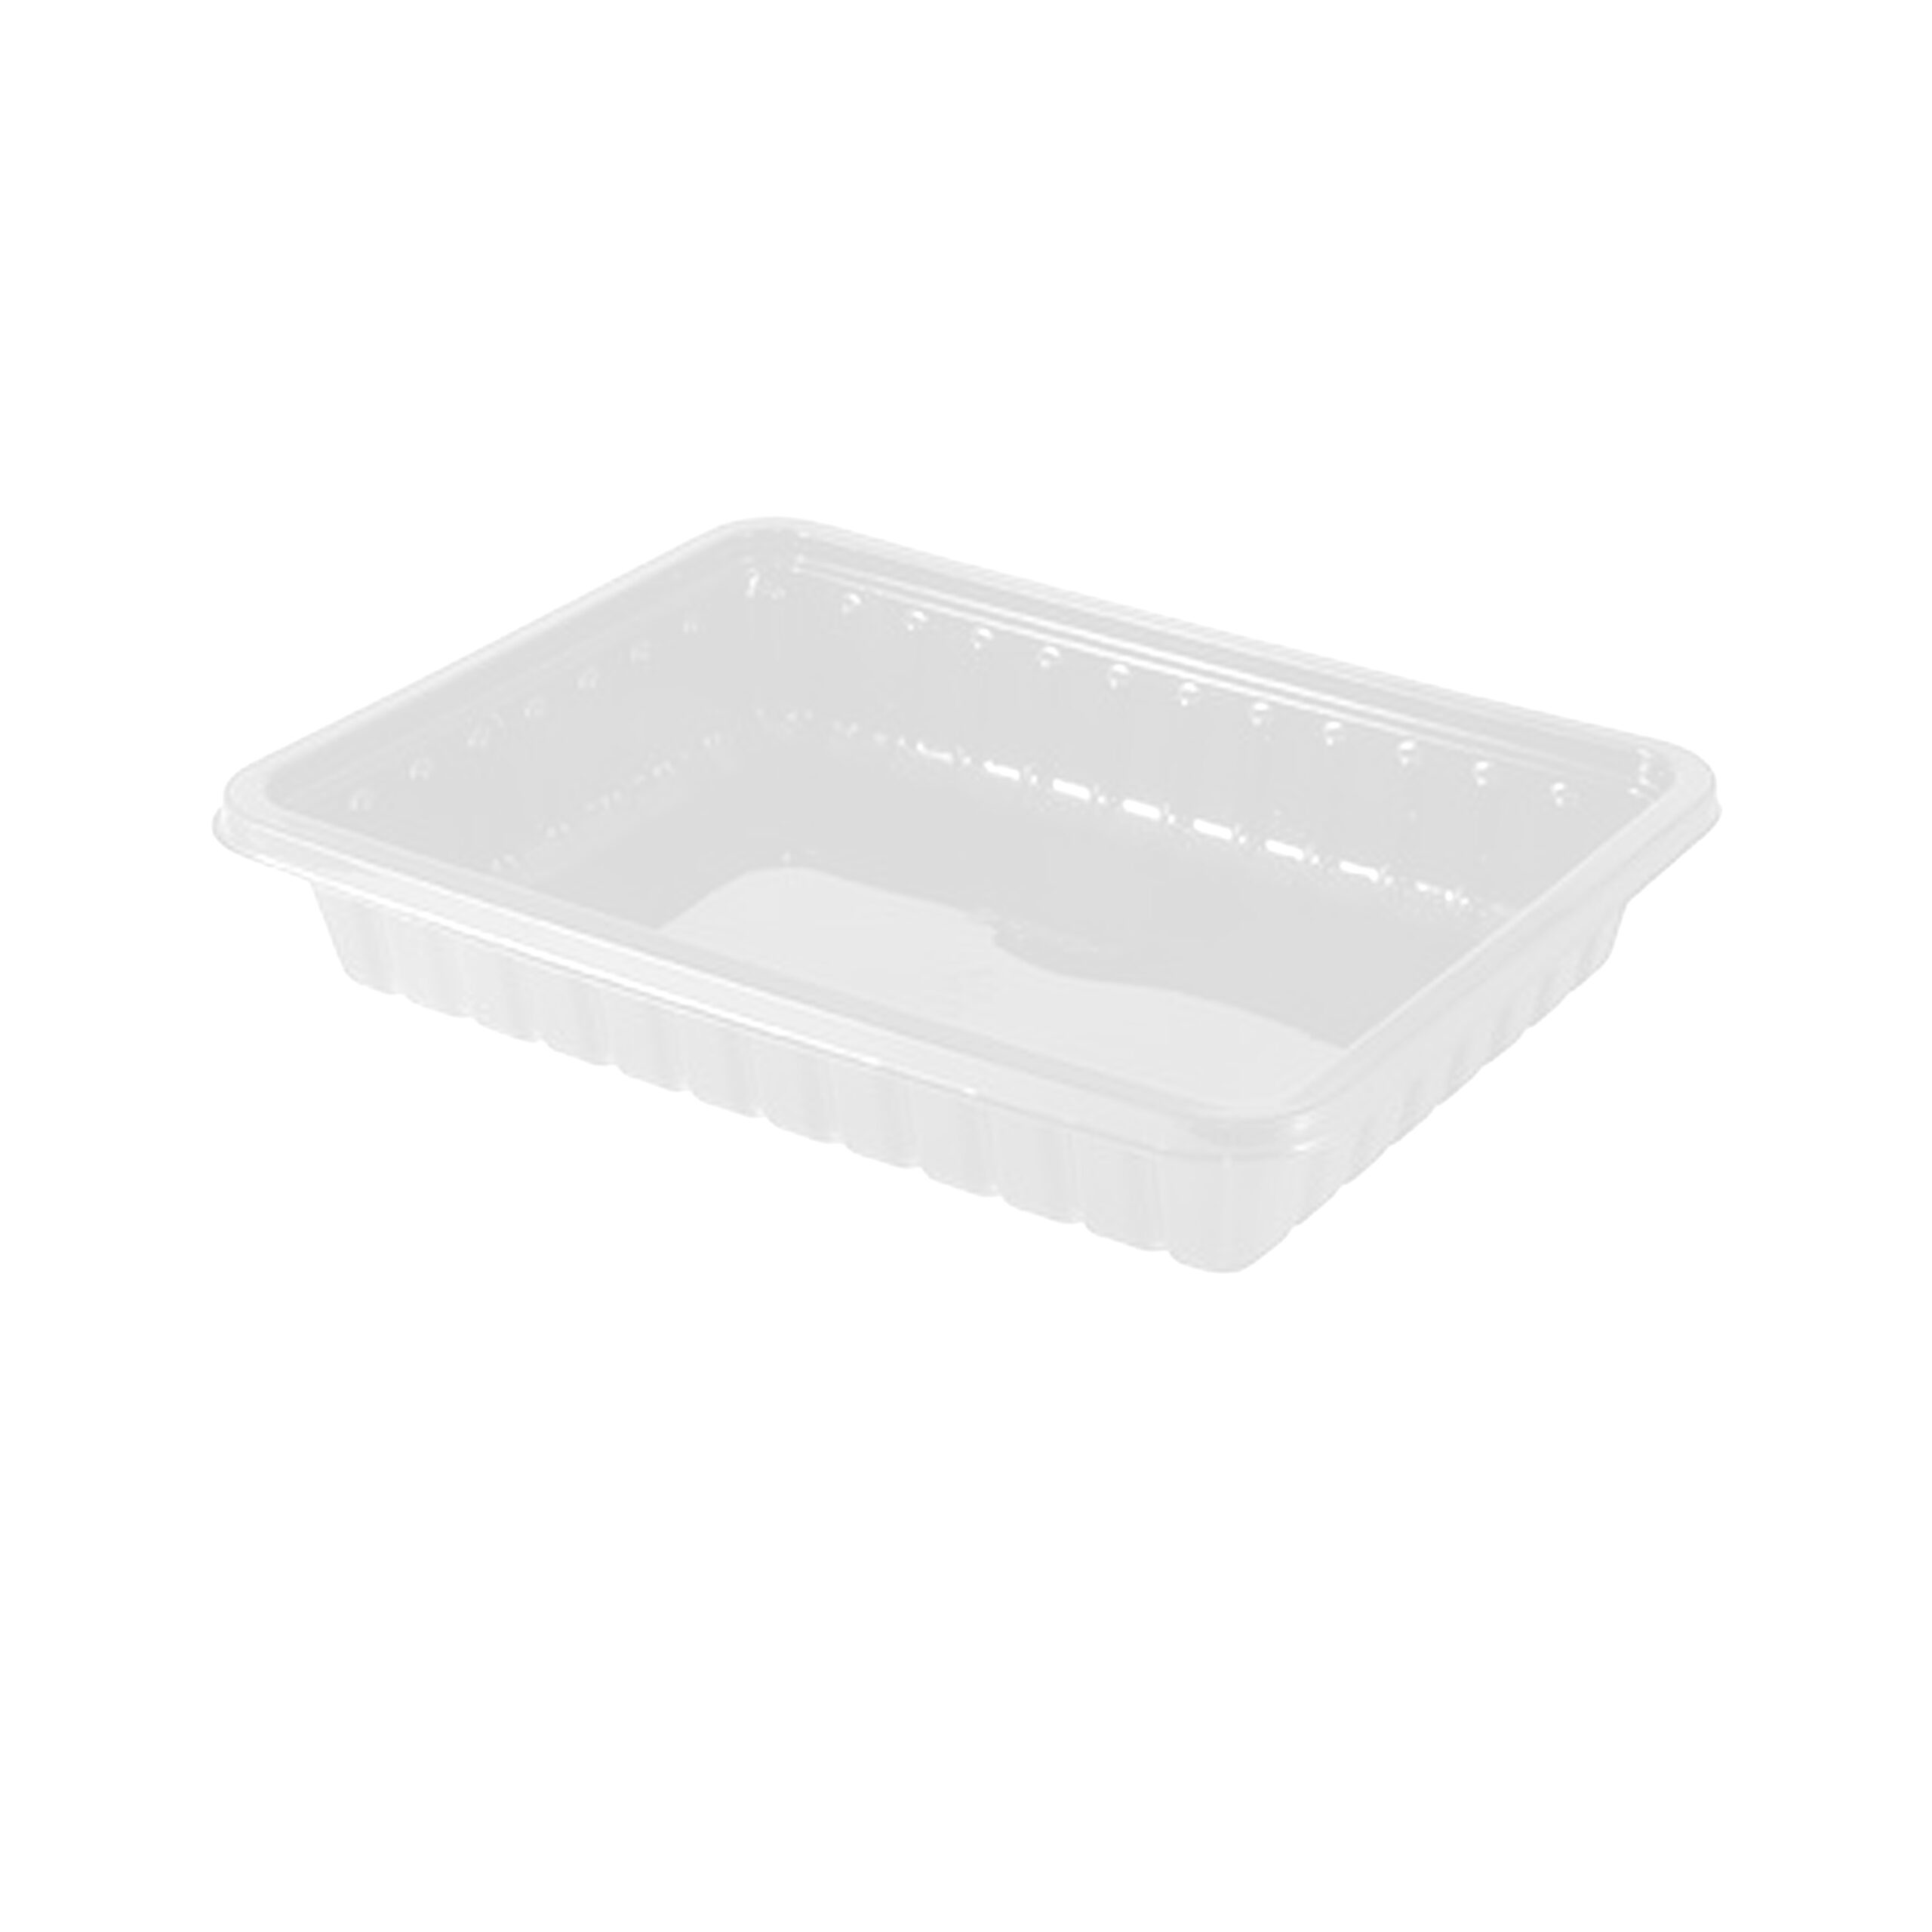 PLASTIC CLEAR
RECTANGULAR
CONTAINER 38F
196x147x38mm
(1x300)